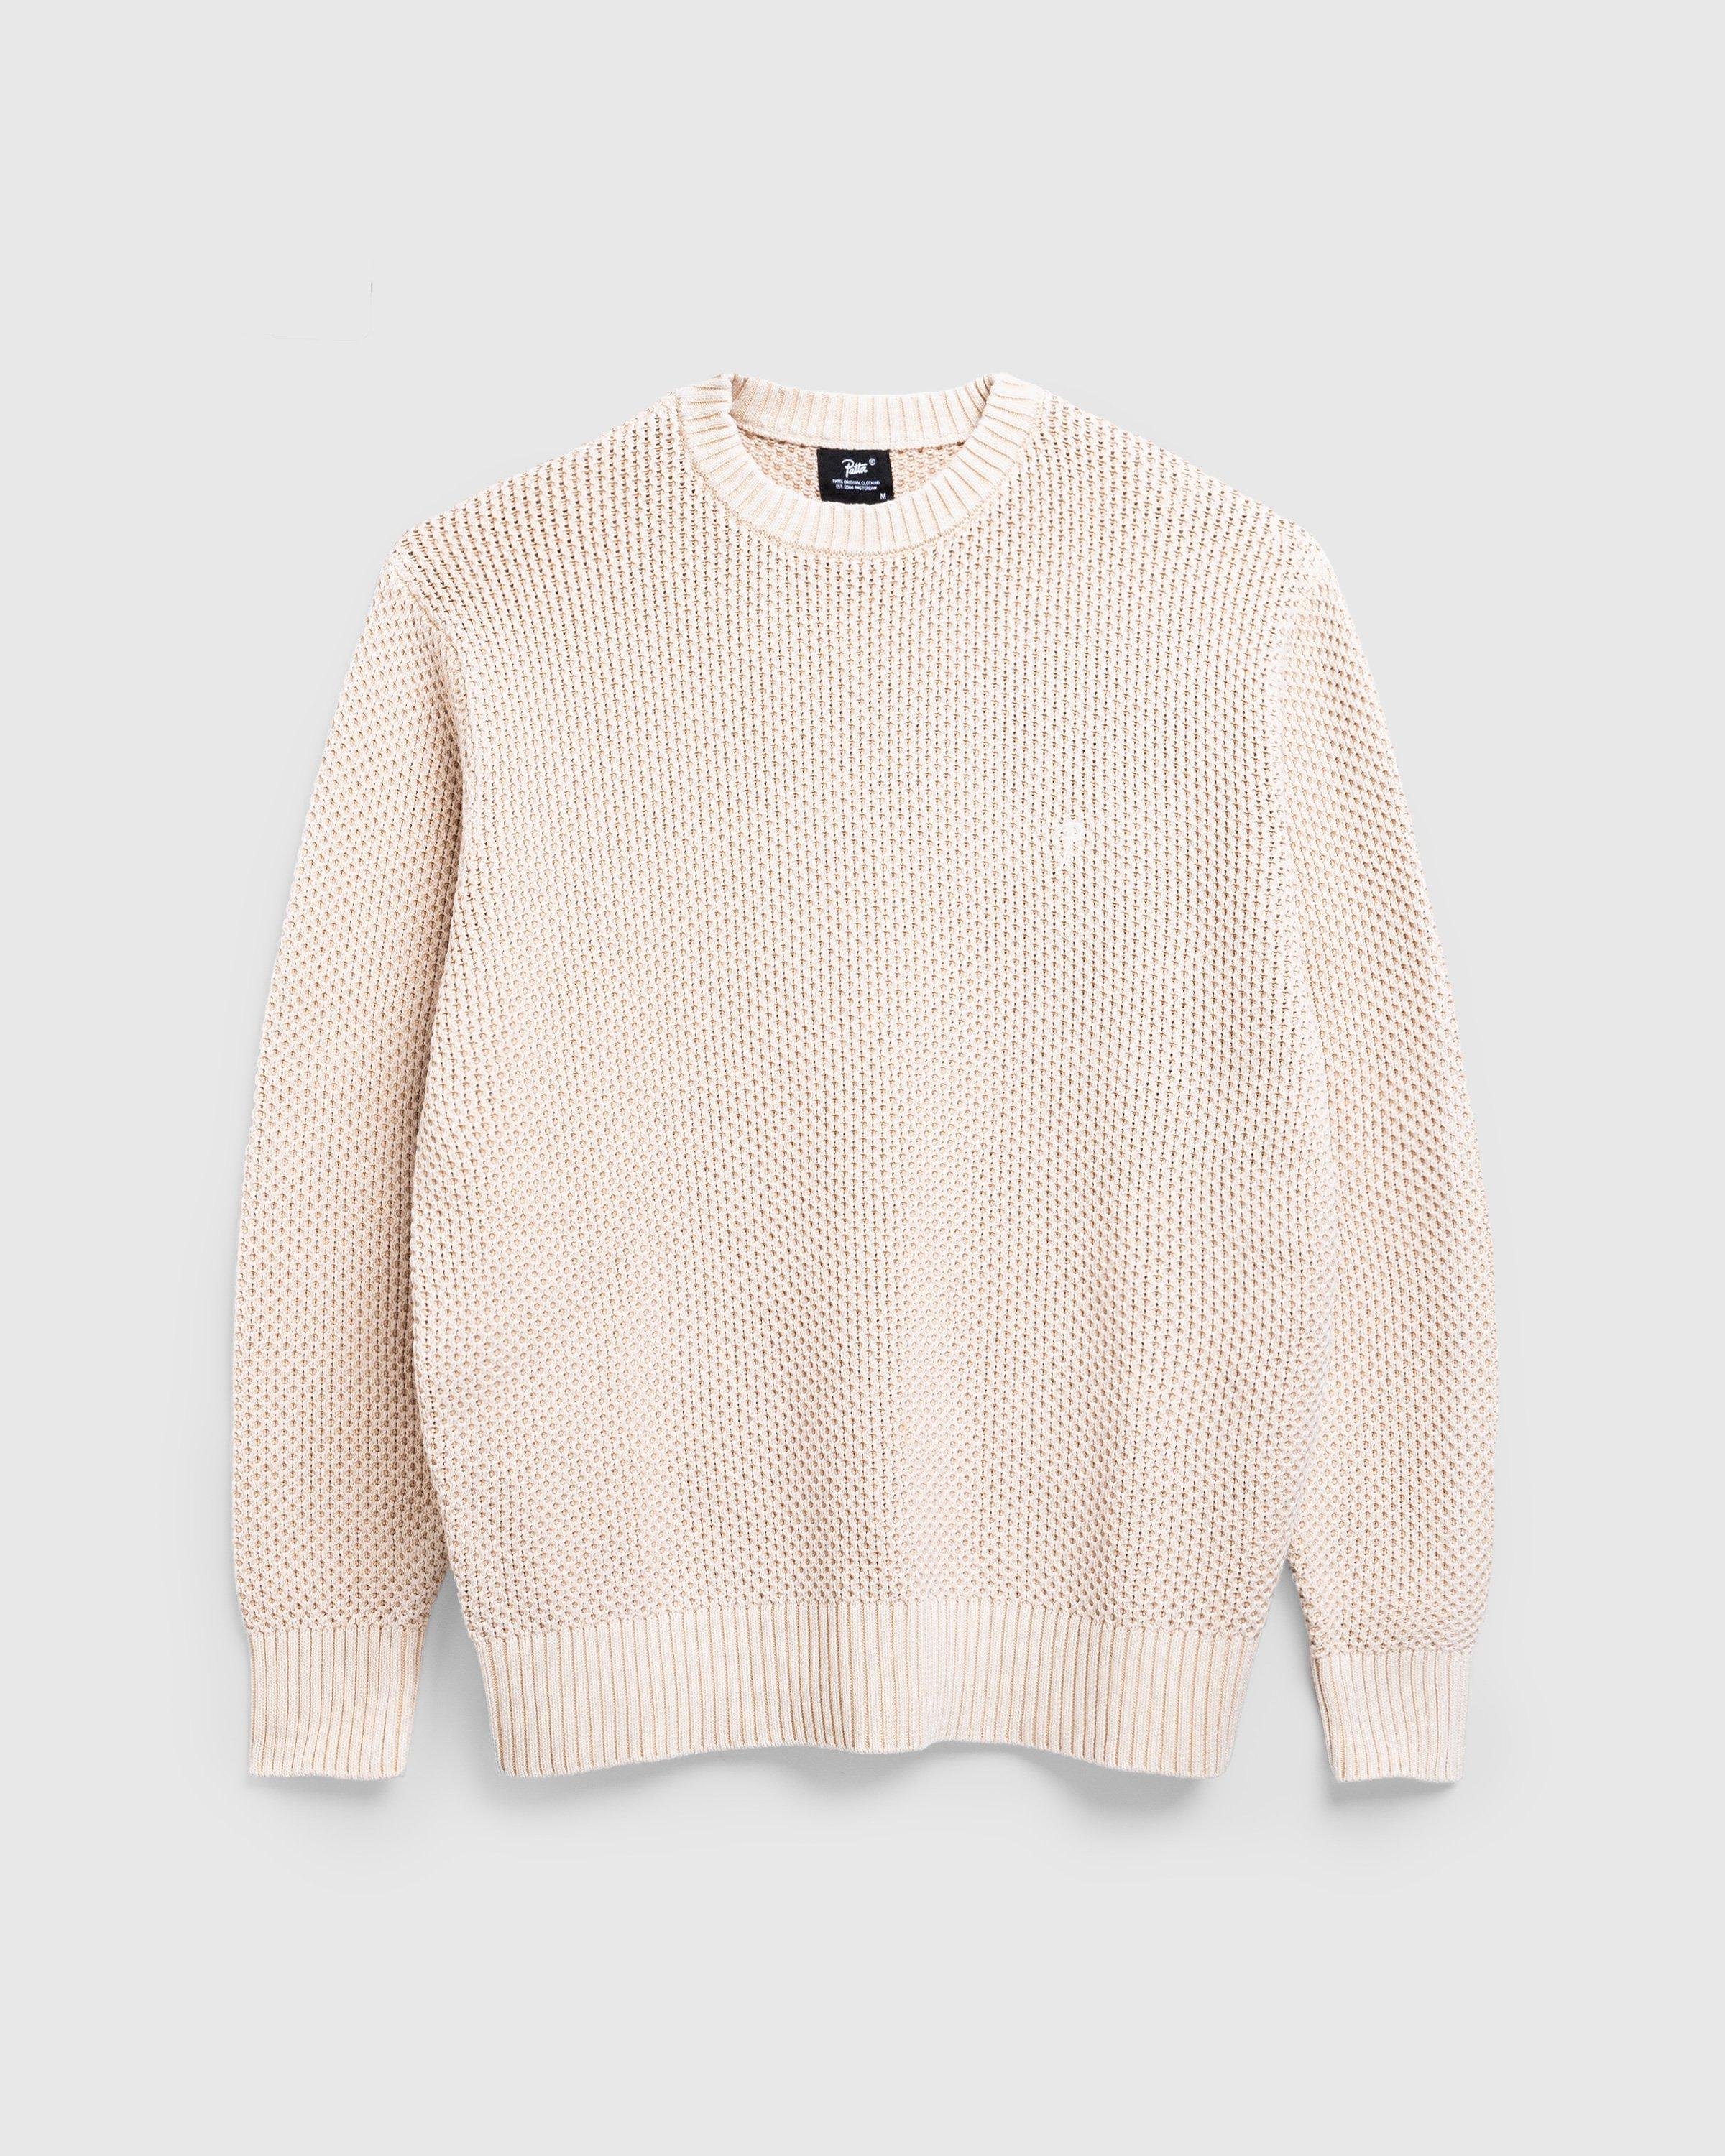 PattaClassic Knitted Sweater Lotus by HIGHSNOBIETY